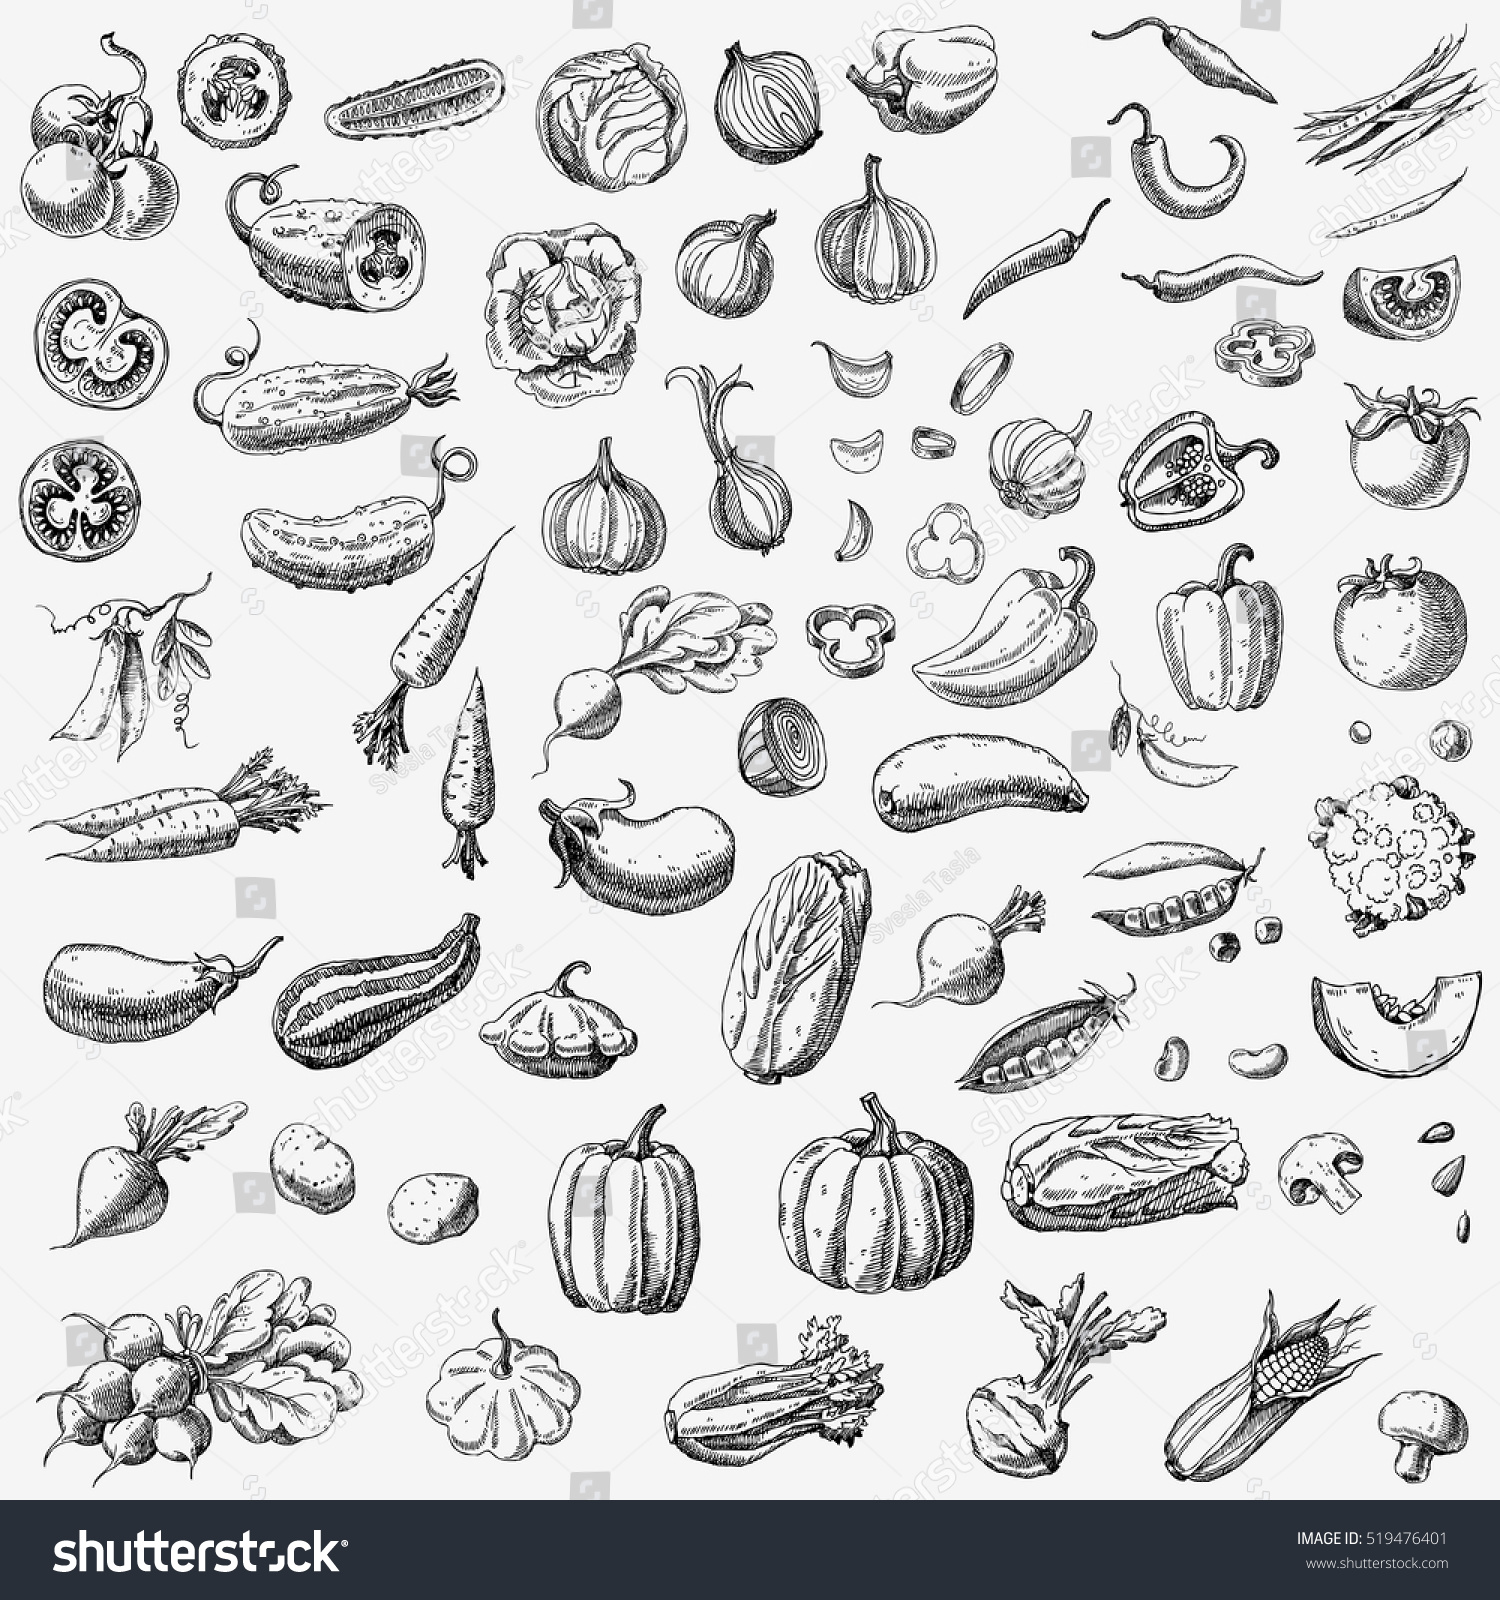 Set of various hand drawn vegetables. Sketches of different food. Isolated on white #519476401